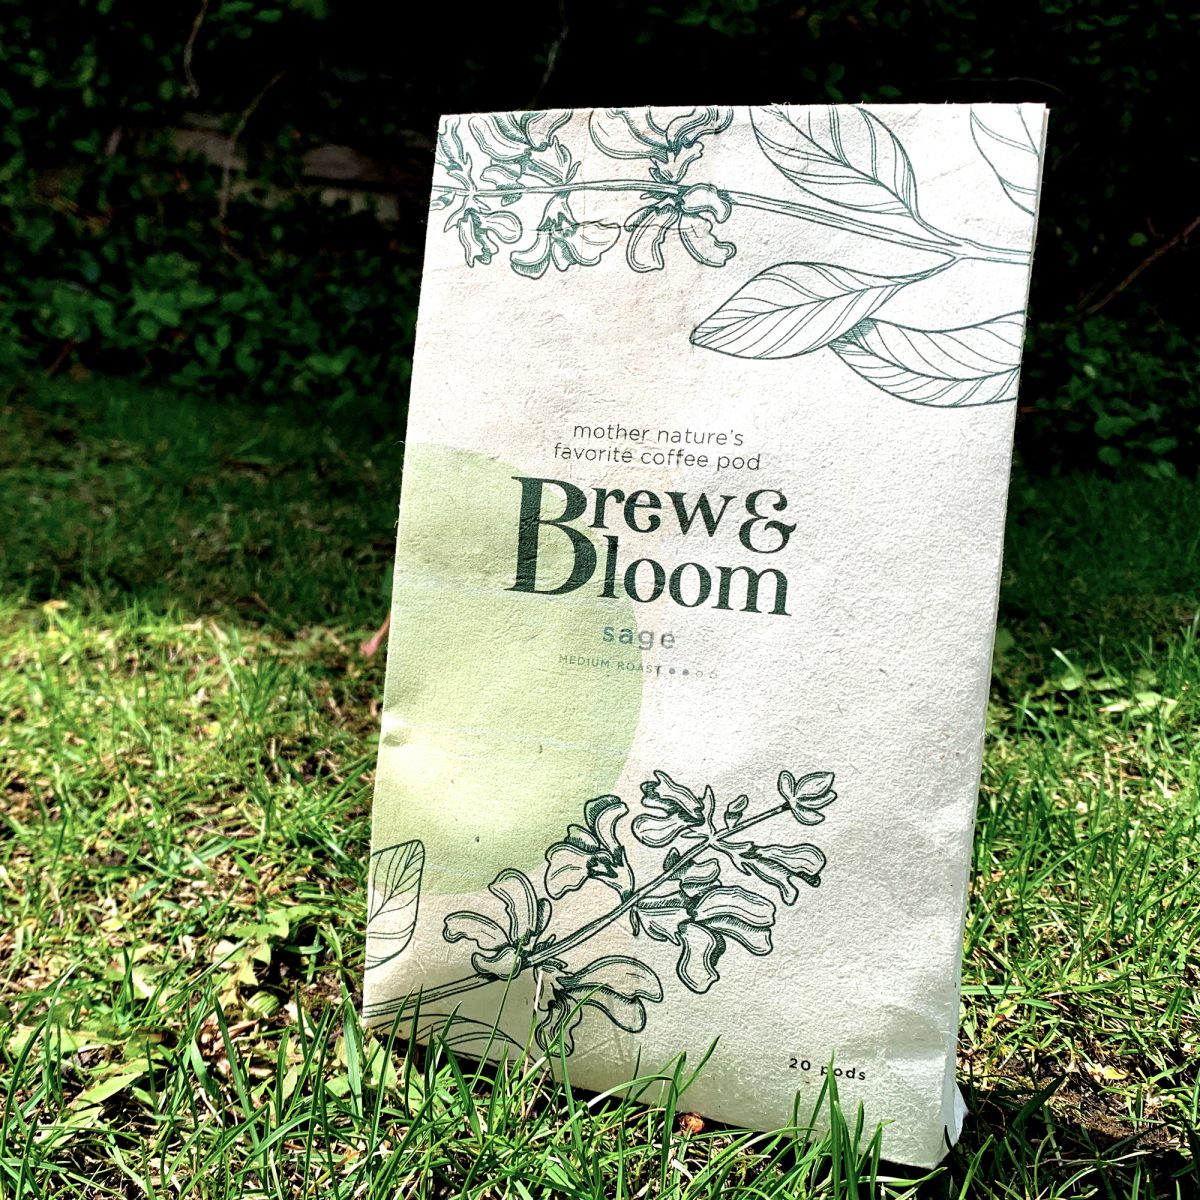 Brew & Bloom: Mother Nature’s Favorite Coffee Pod